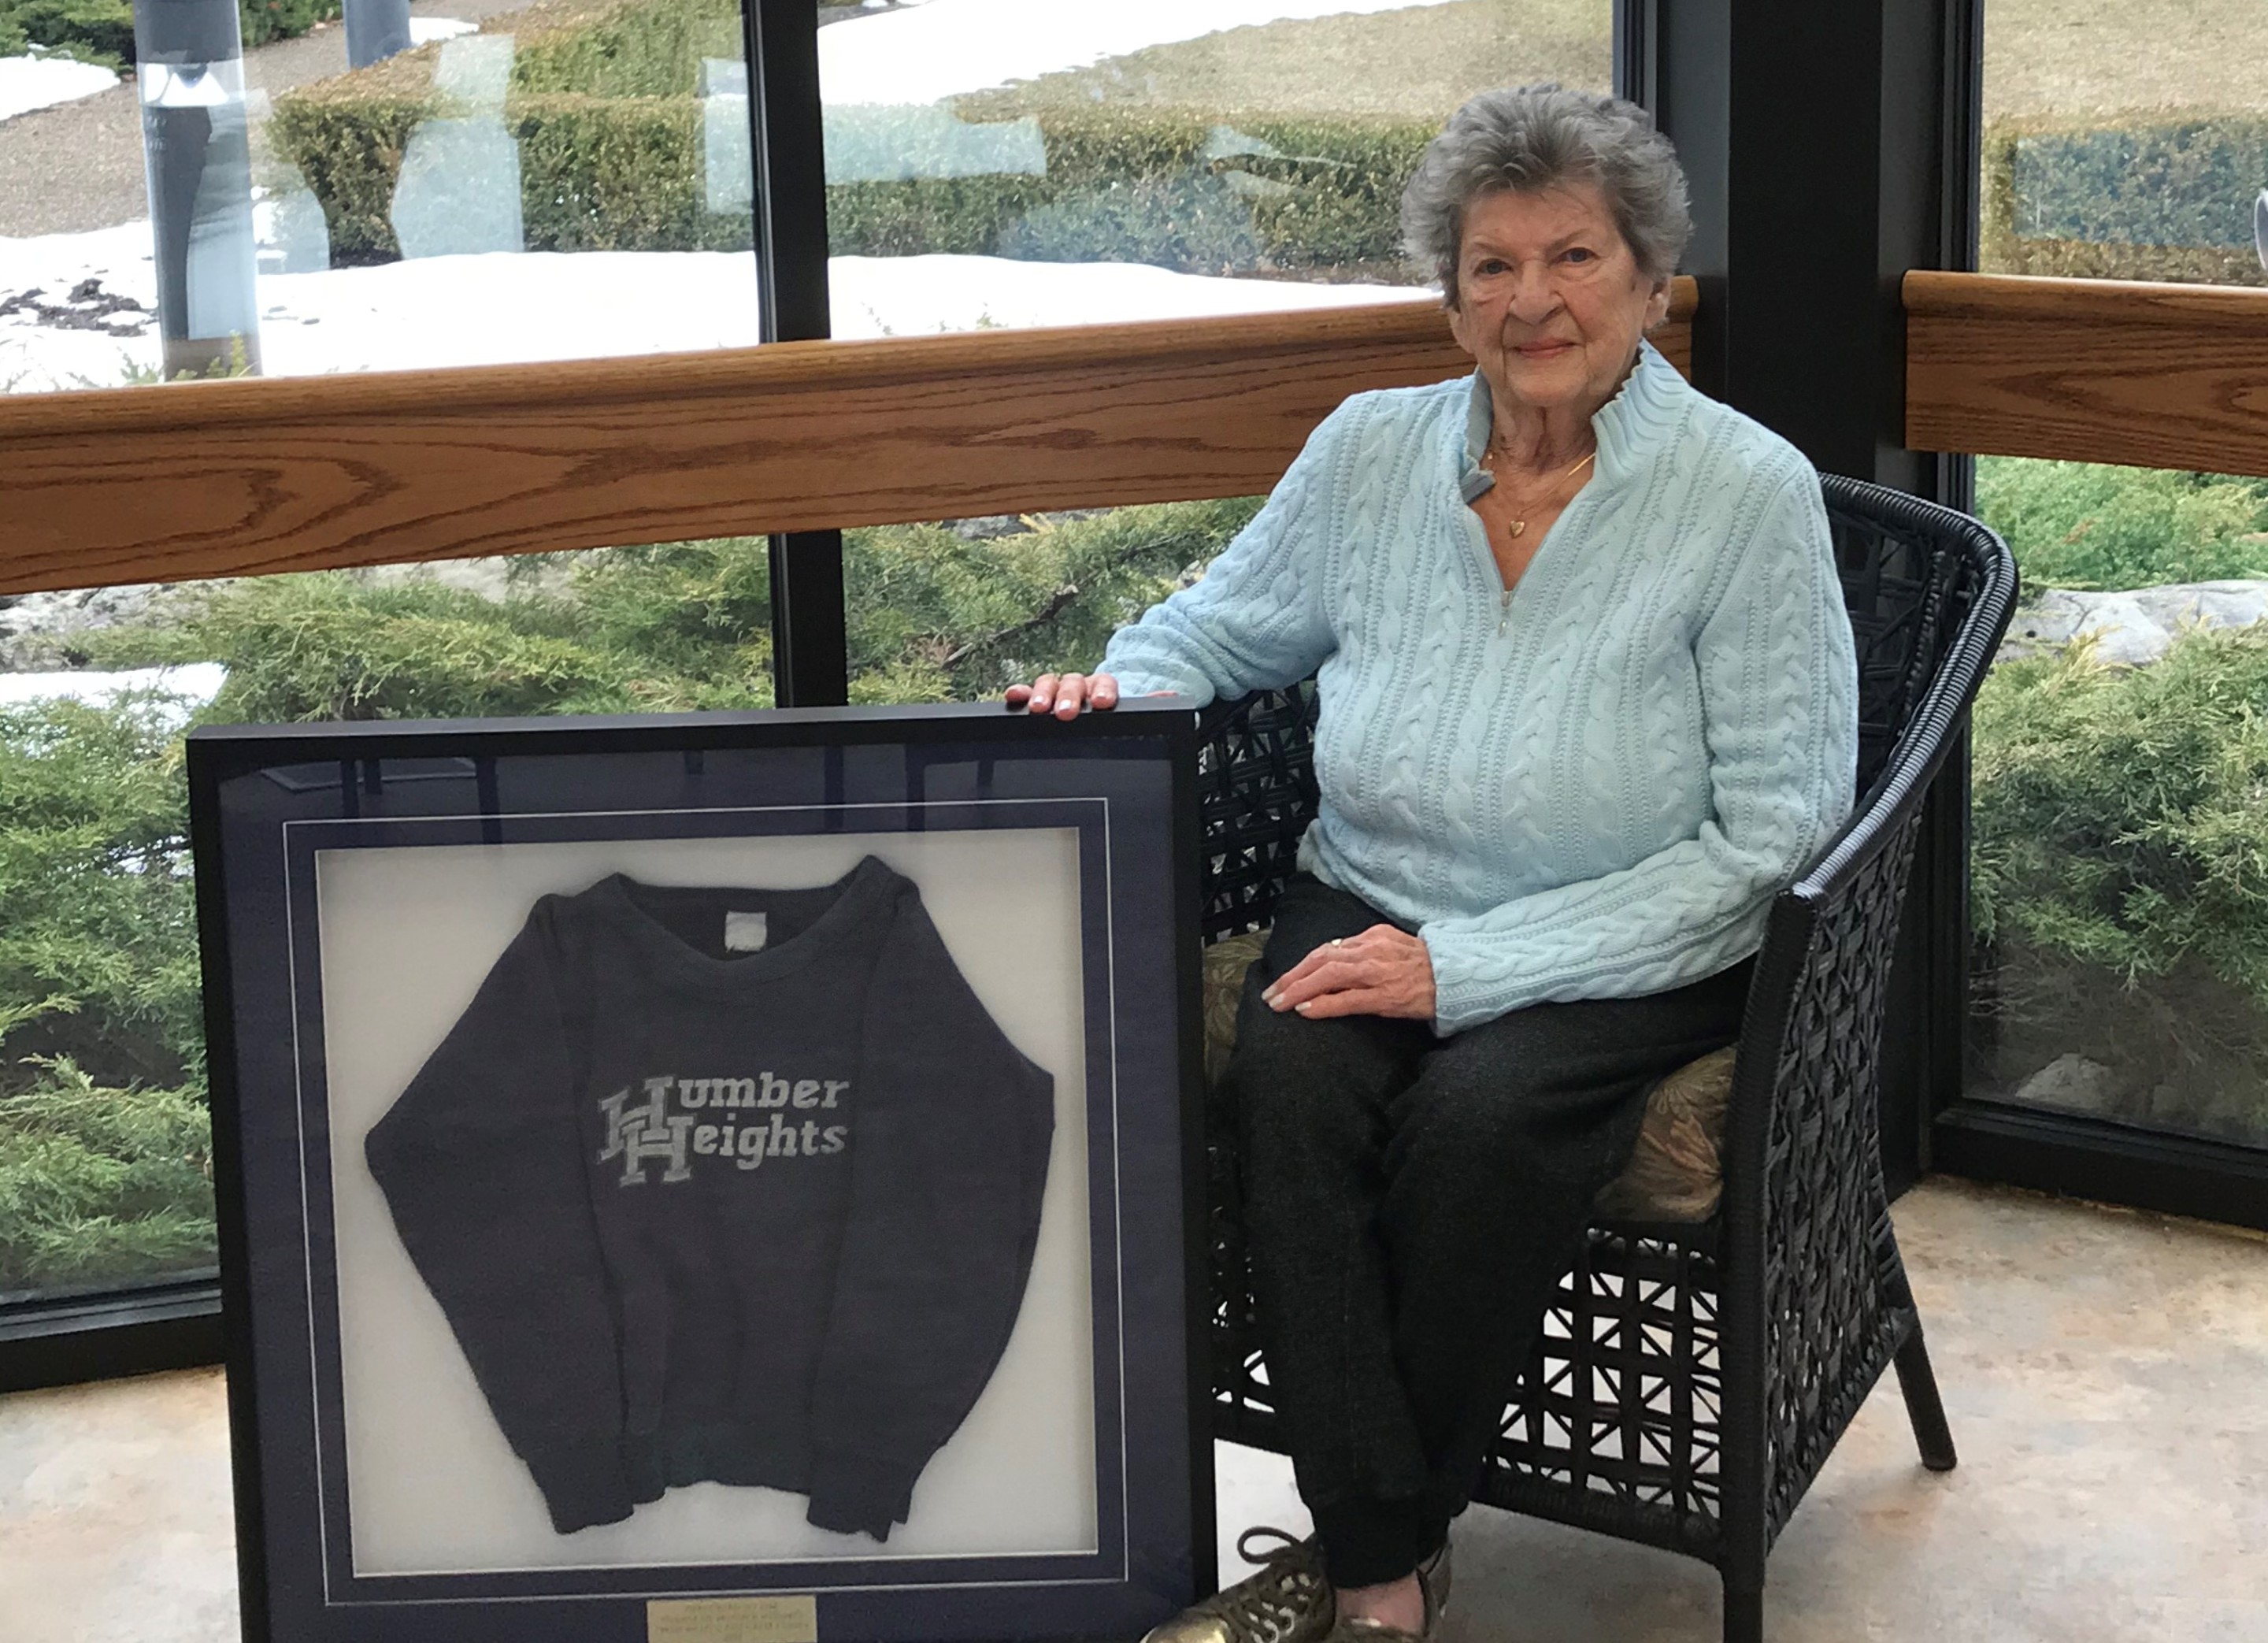 Ruth sits alongside the sweatshirt from Humber Heights school she gave her son more than 40 years ago.